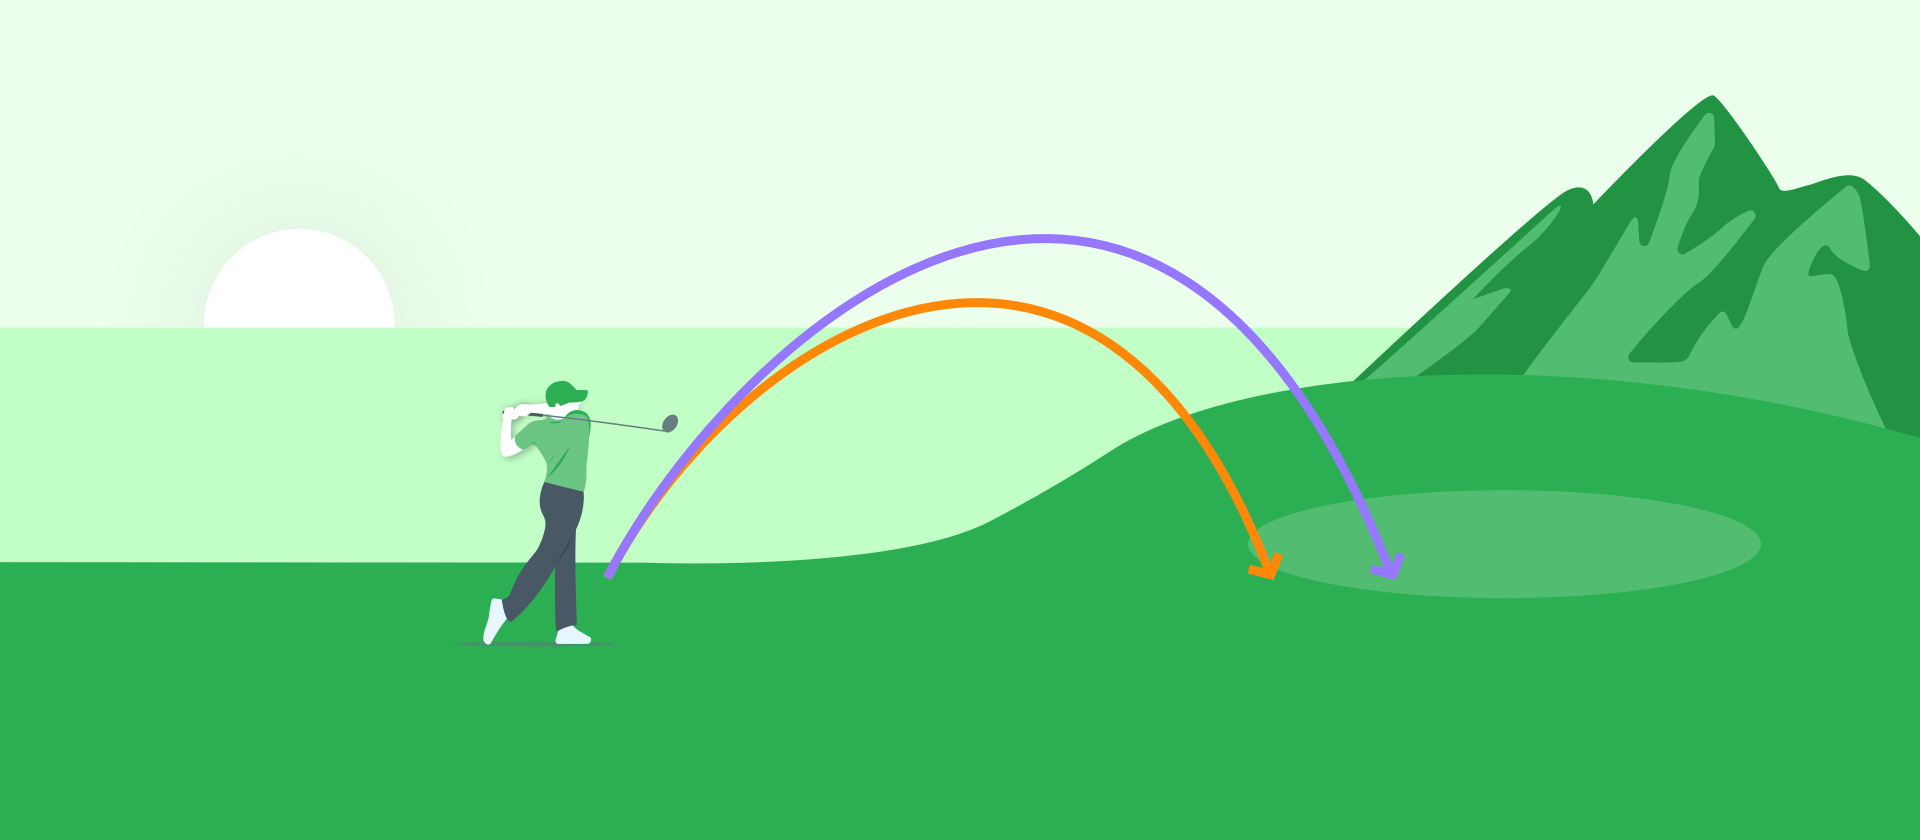 How does altitude affect the distance of a golf shot if I’m in the mountains vs sea level?